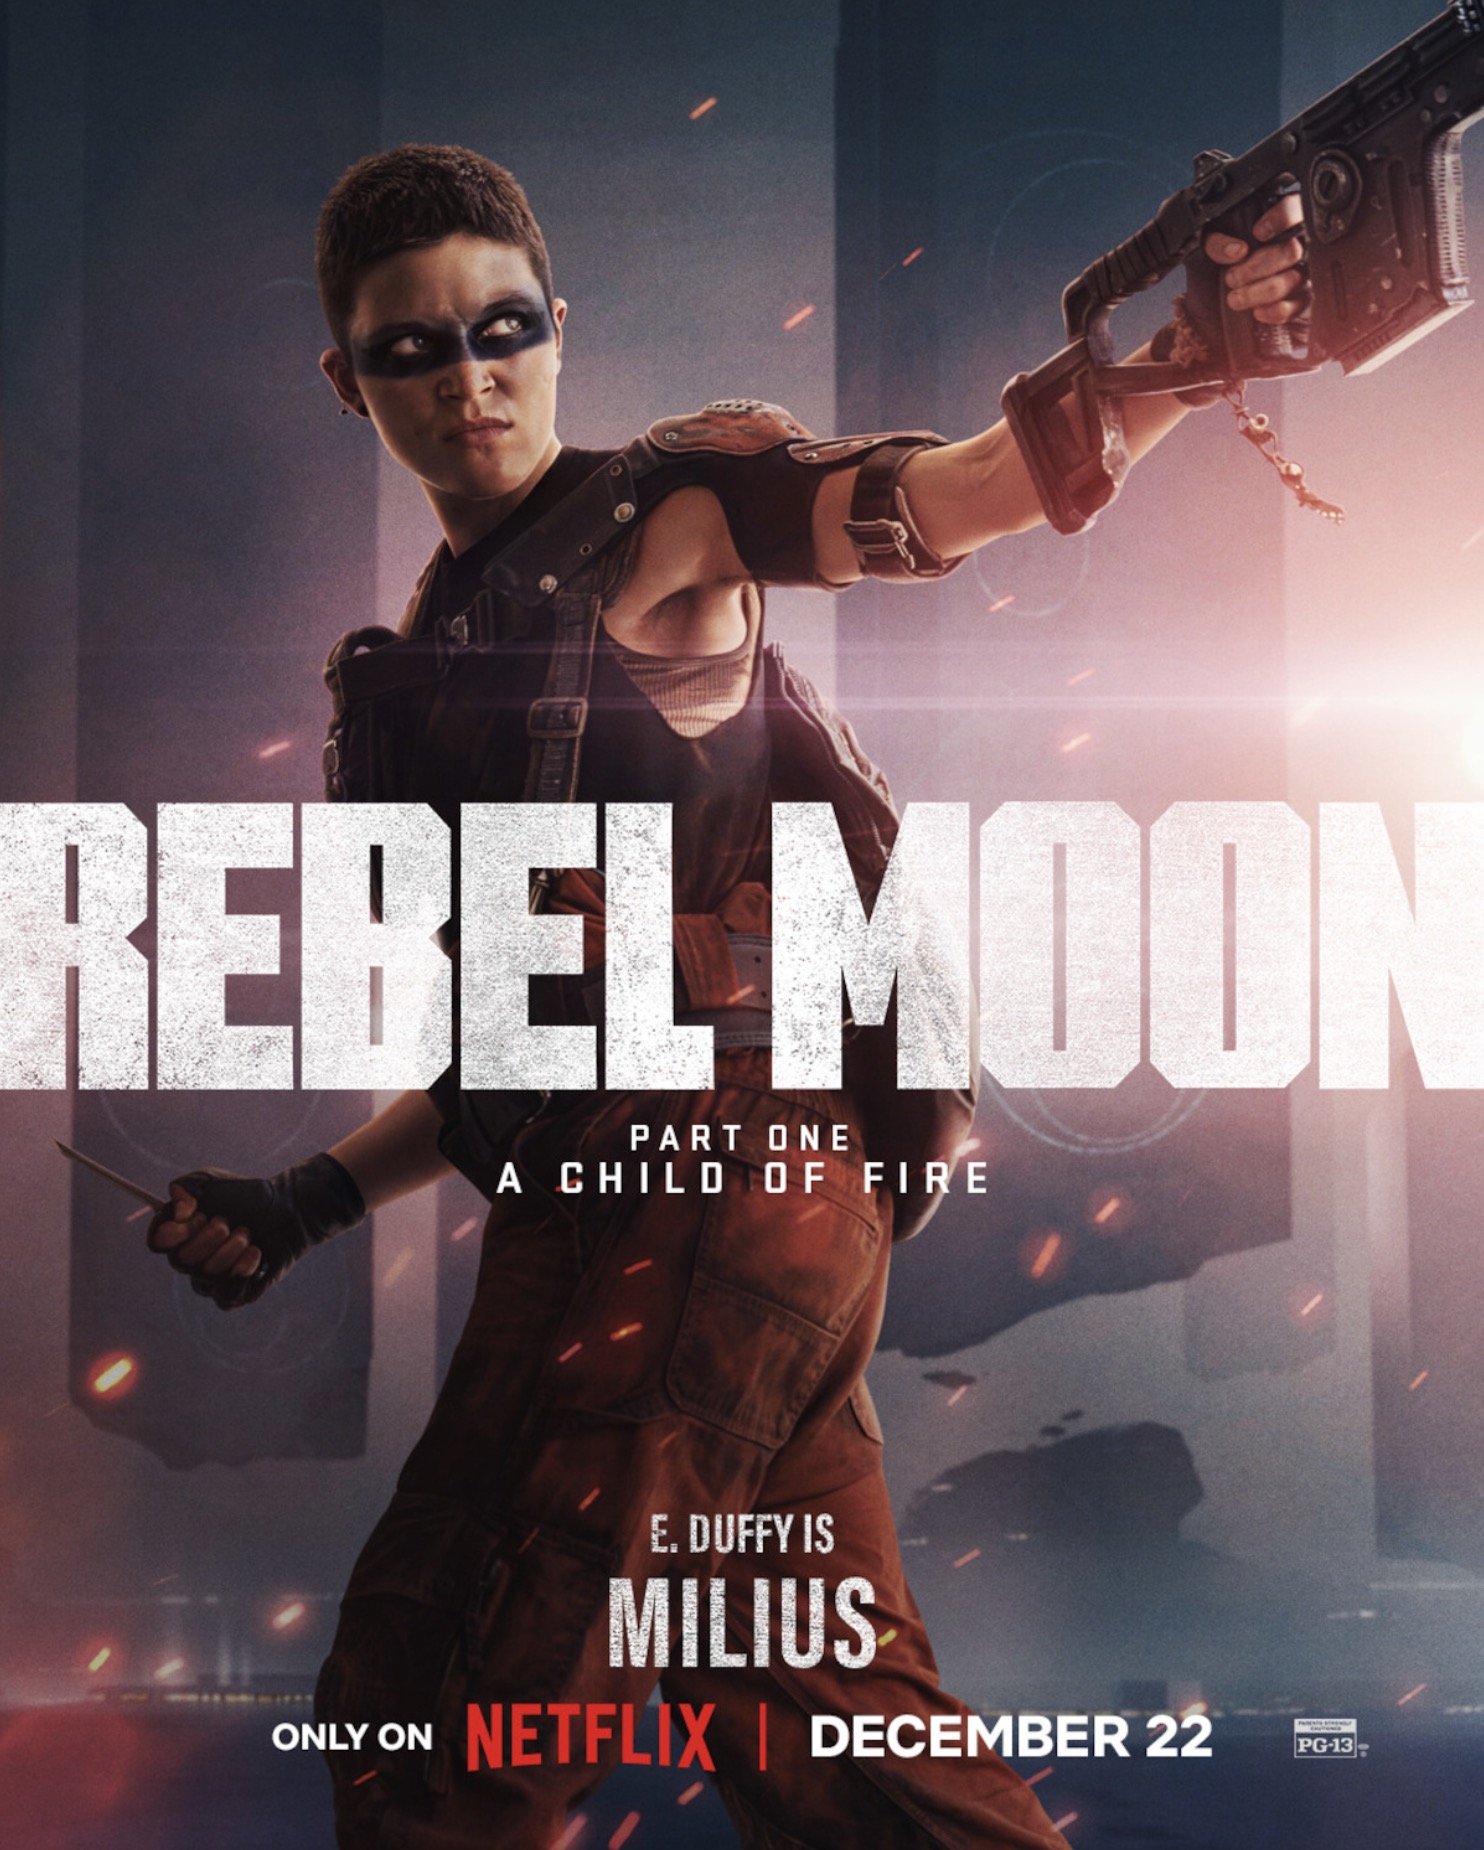 Rebel Moon: A Child of Fire OTT release date – When and where to watch Zack  Snyder's Star Wars inspired sci-fi action drama